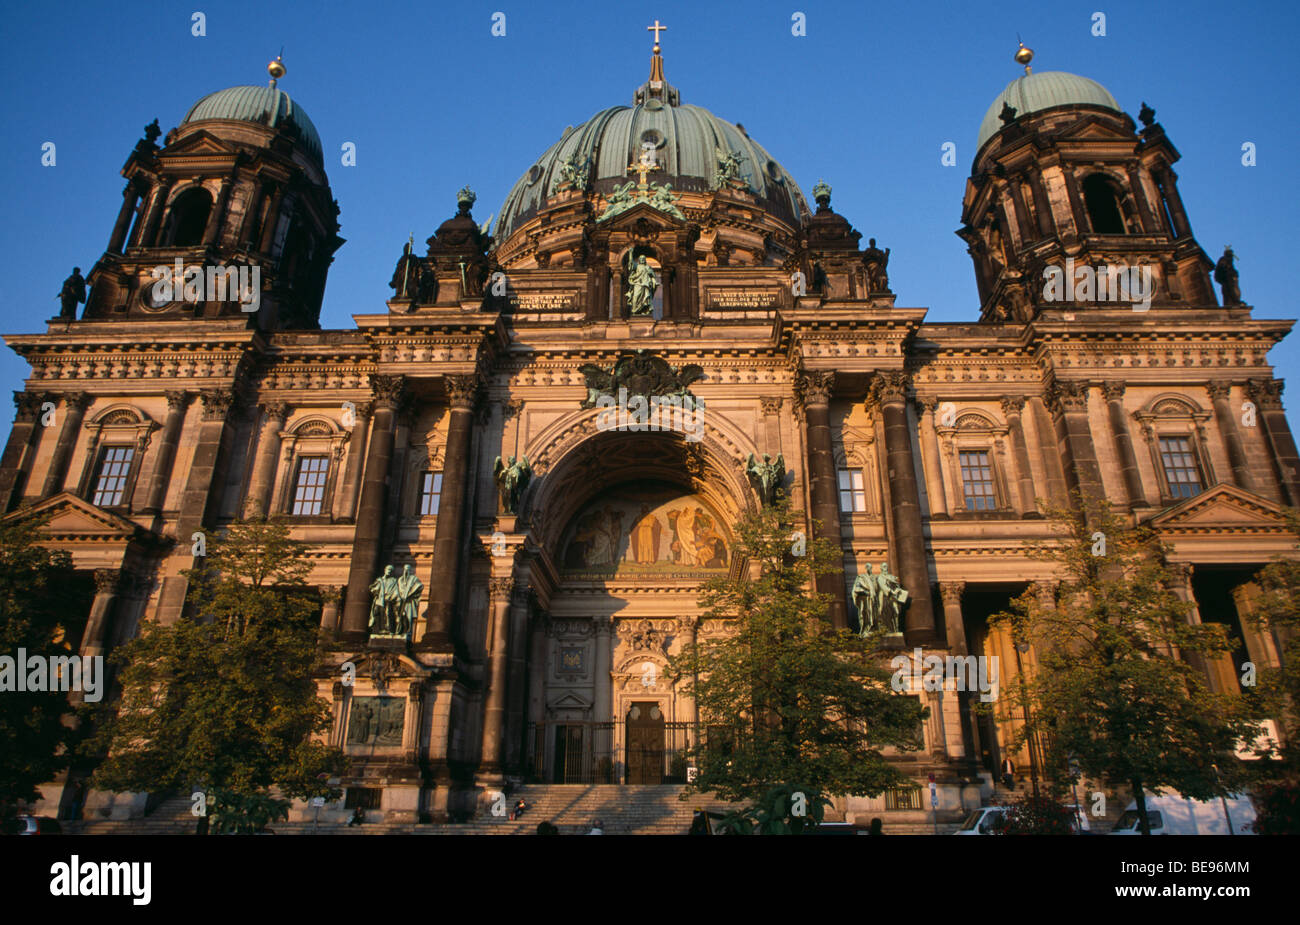 GERMAN Berlin Berliner Dom Cathedral Church Baroque Baroque exterior designed by Julius Raschdorff and completed in 1905 Stock Photo